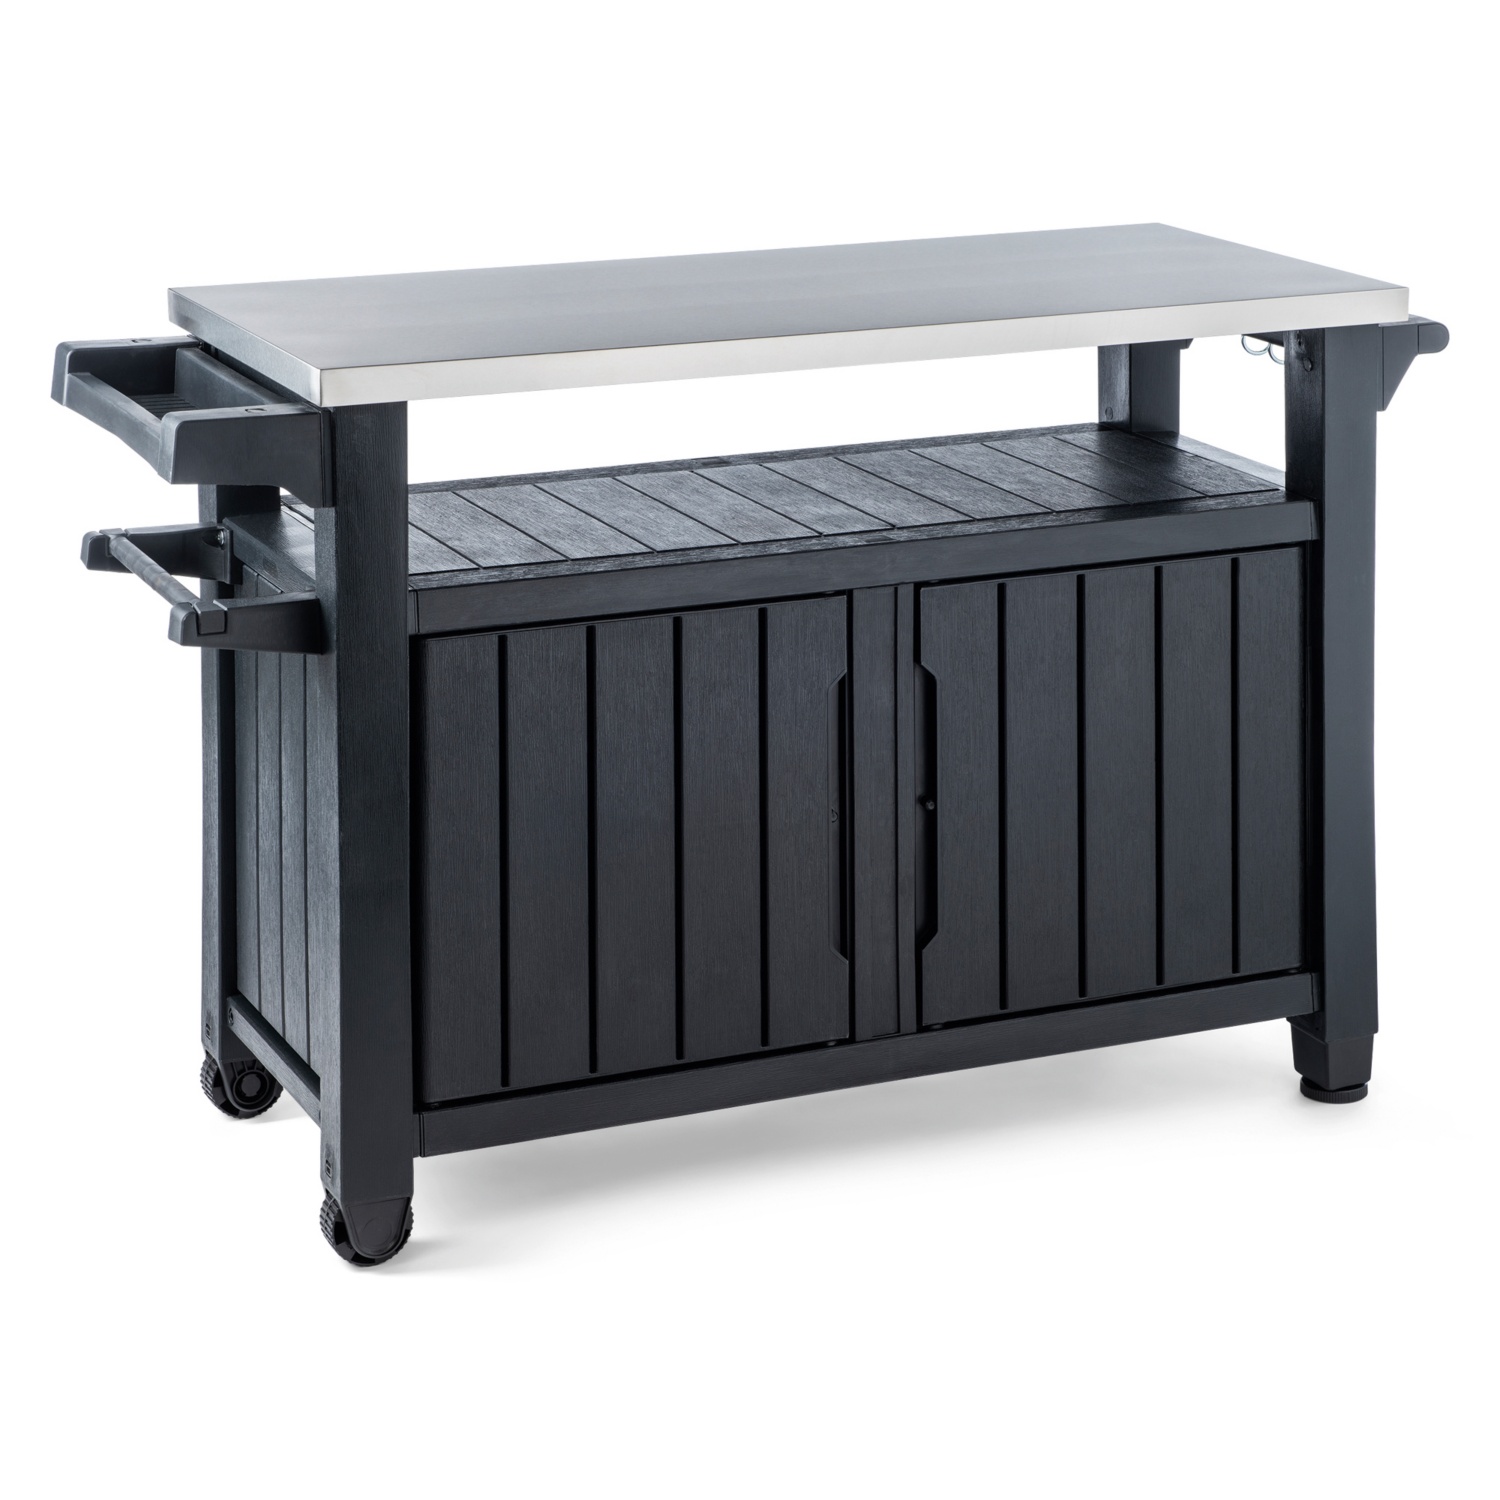 KETER Table d'appoint pour barbecue XL